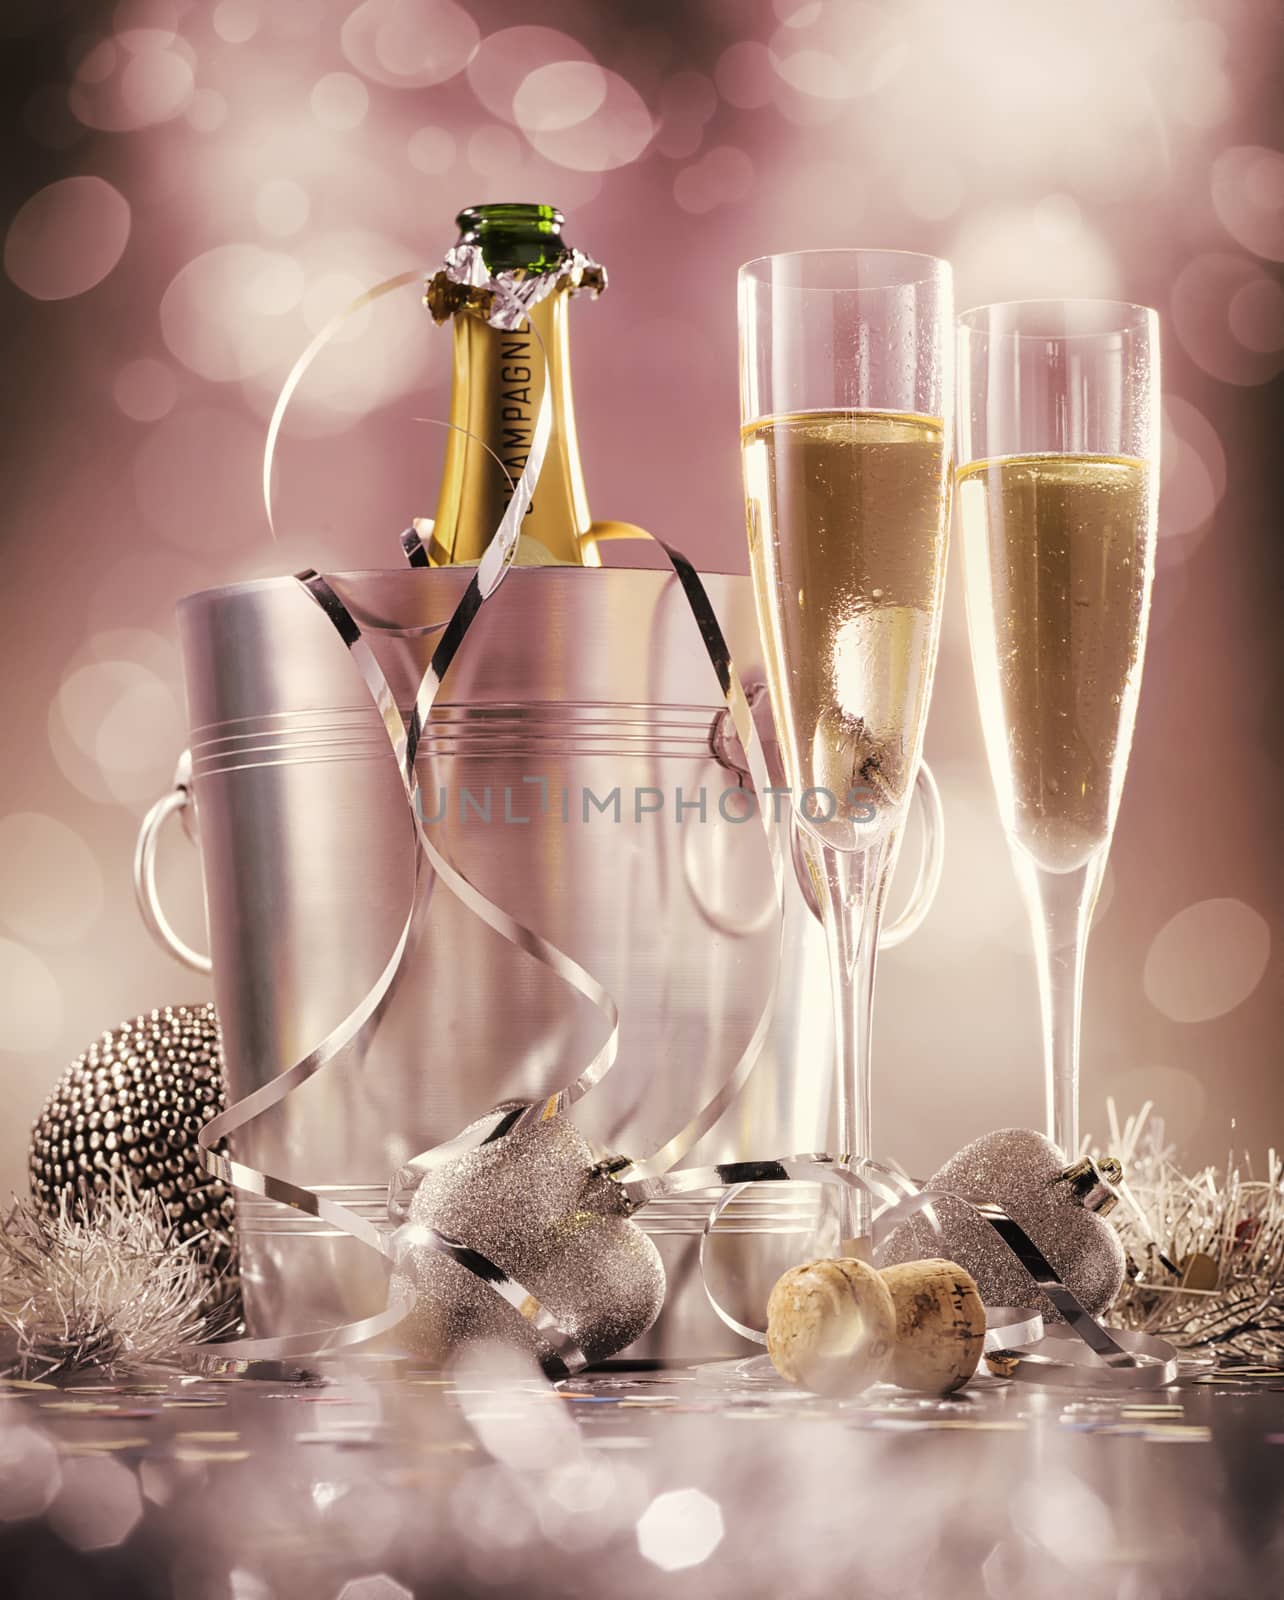 Two glasses of champagne with bottle in cooler on a pink background, selective focus by janssenkruseproductions